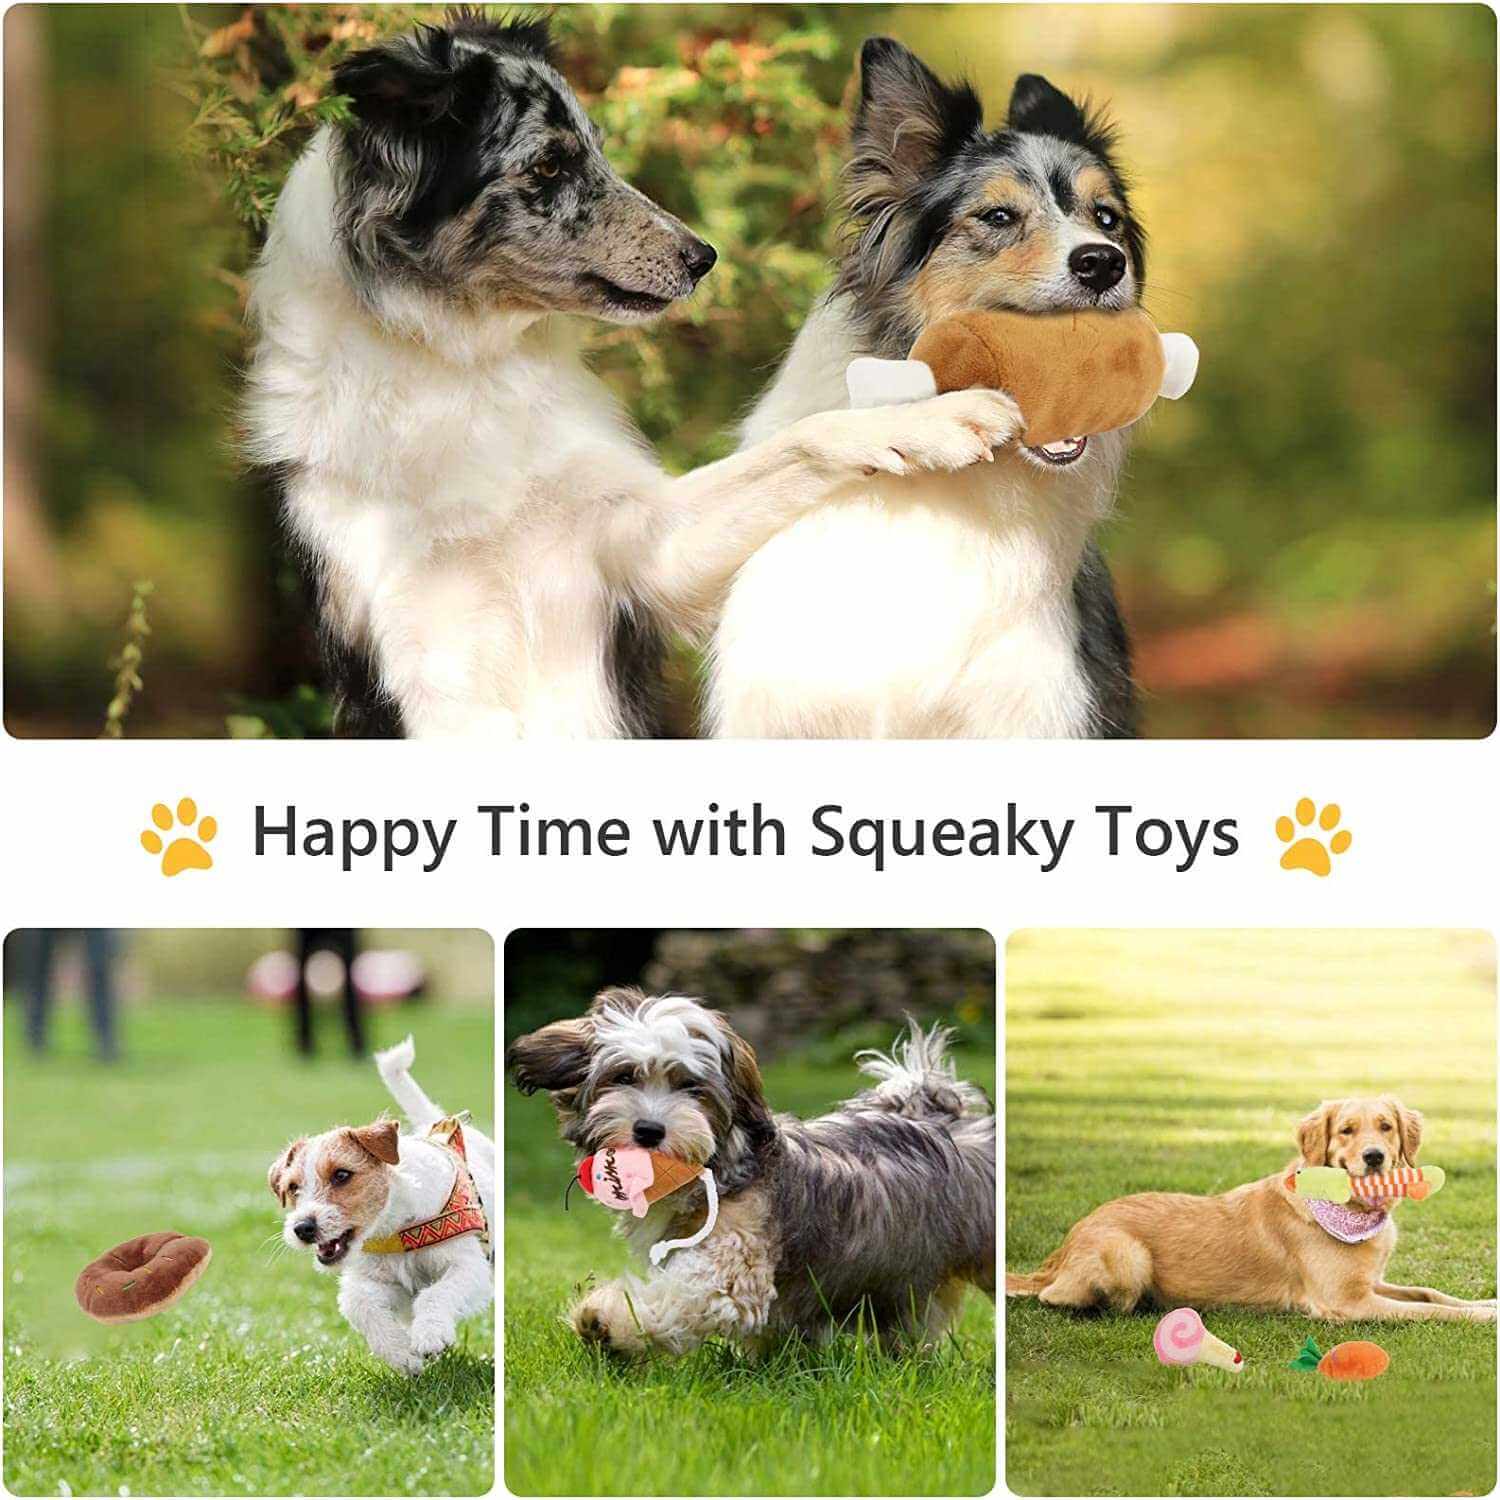 KUTKUT 11 Pcs Squeaky Dog Toys, Puppy Teething Chew Toys, Interactive Cute and Safe Stuffed Plush Squeaky Toys, Training Clicker with Wrist Strap, Durable and Washable, for Puppies and Small 